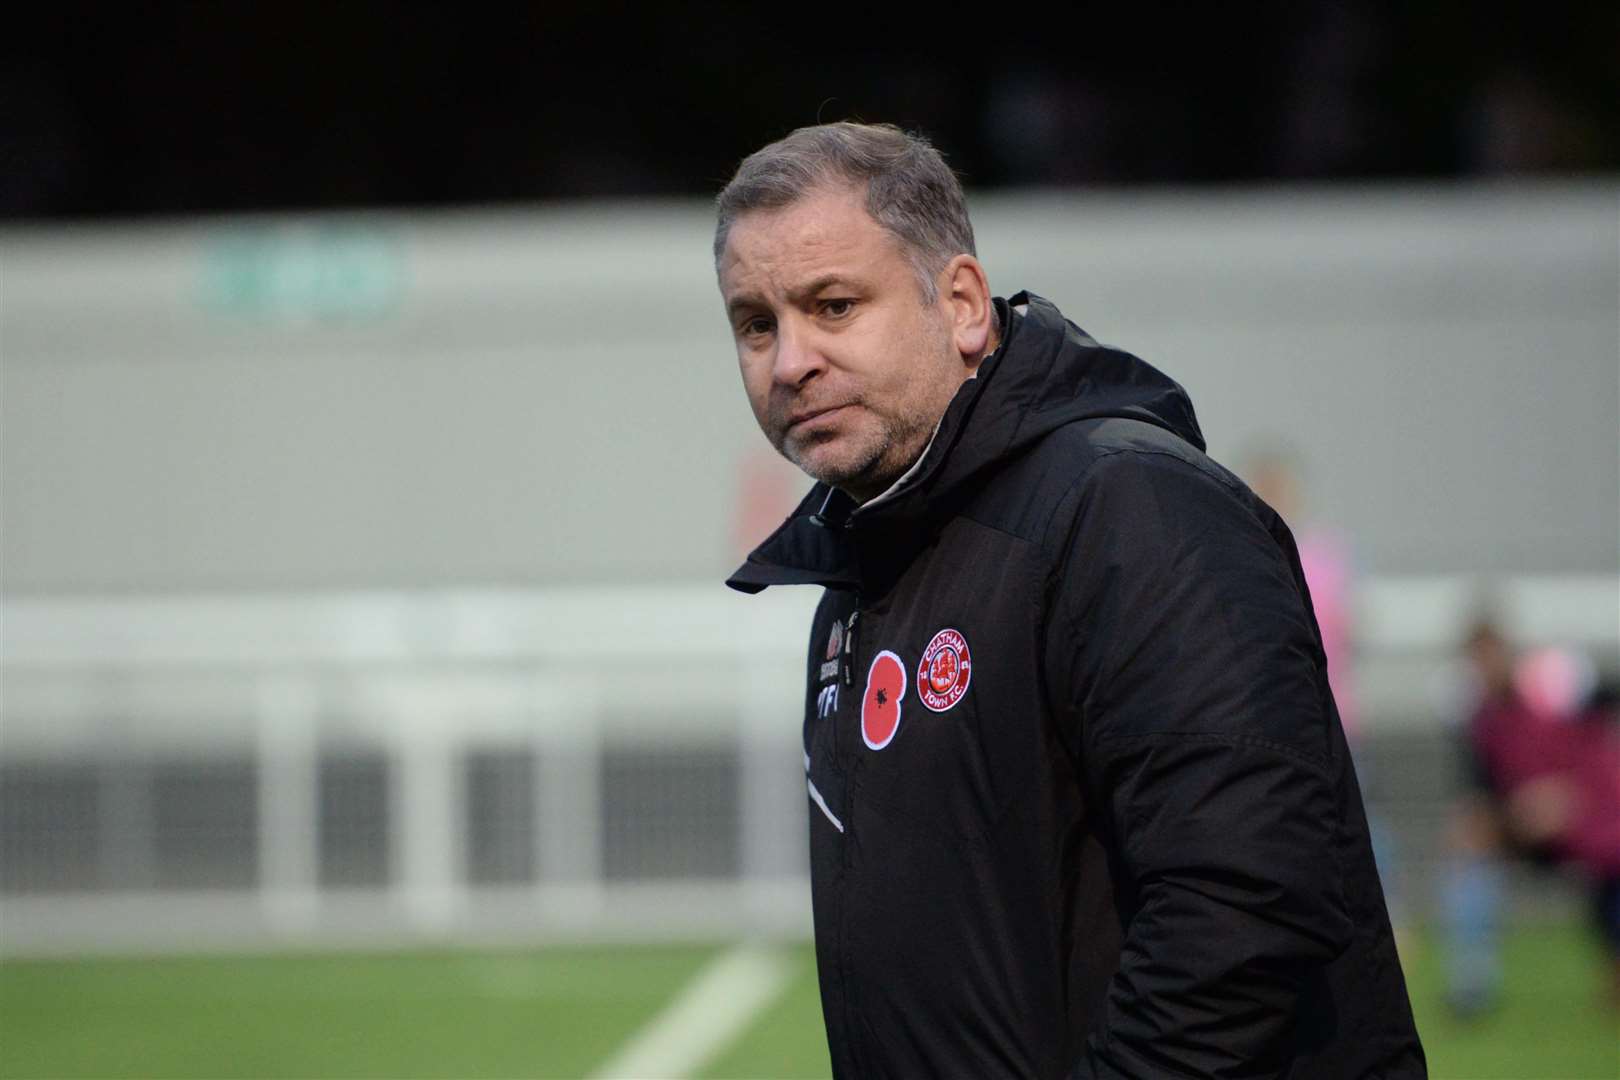 Kevin Hake will manage the Chatham team for the 2022/23 season. Picture: Chris Davey.